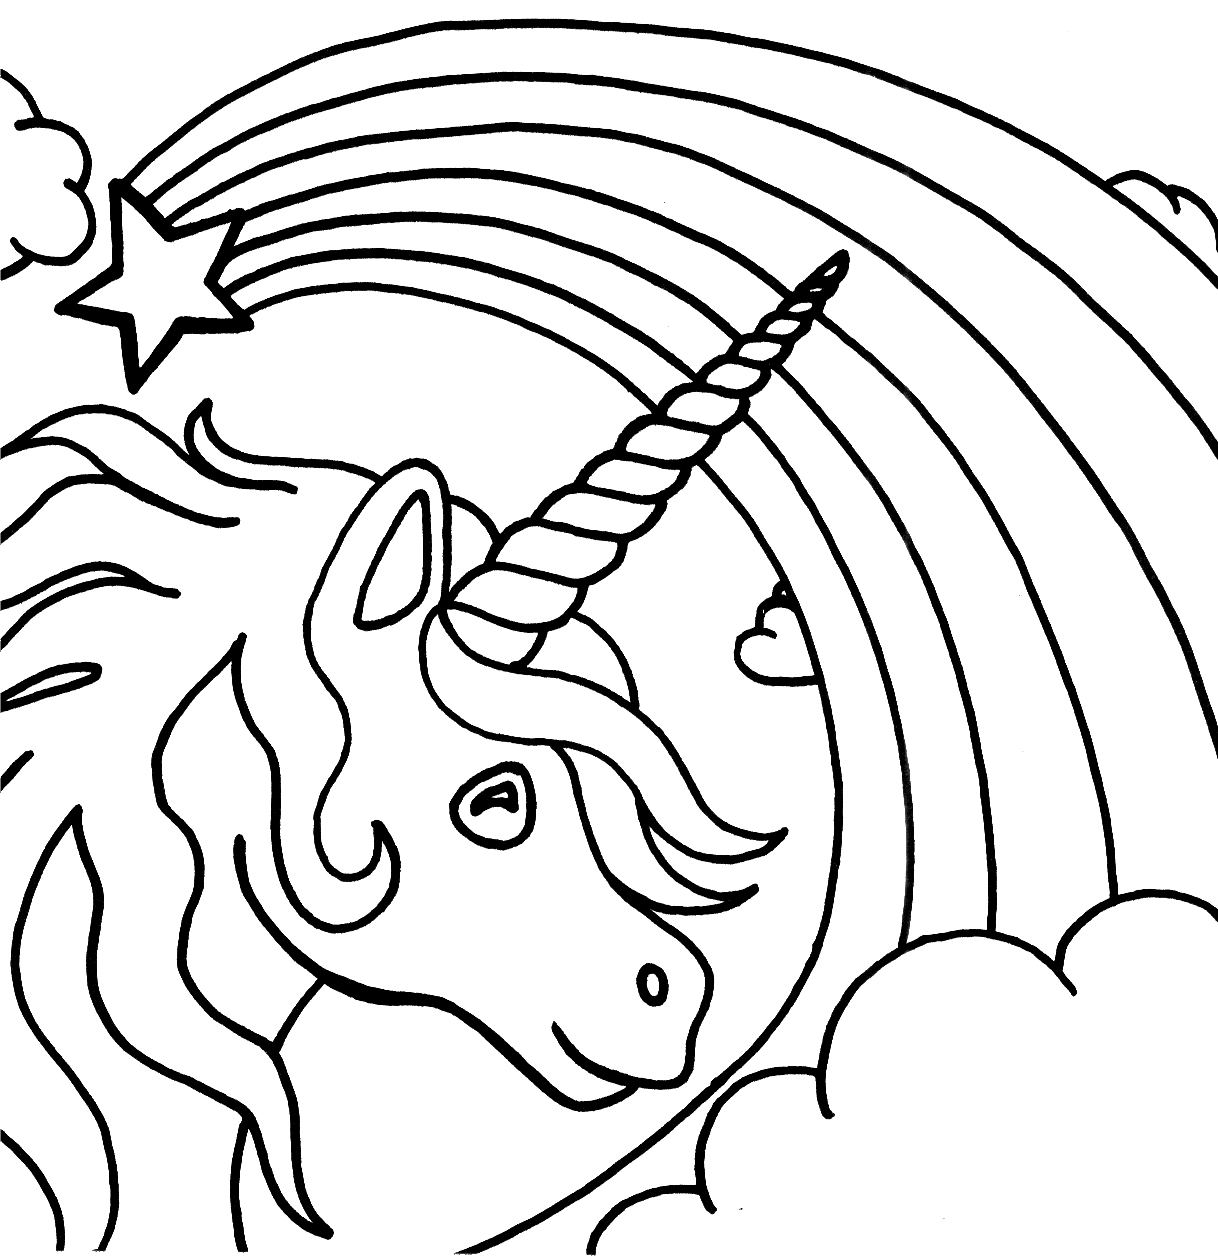 unicorn-coloring-pages-to-download-and-print-for-free